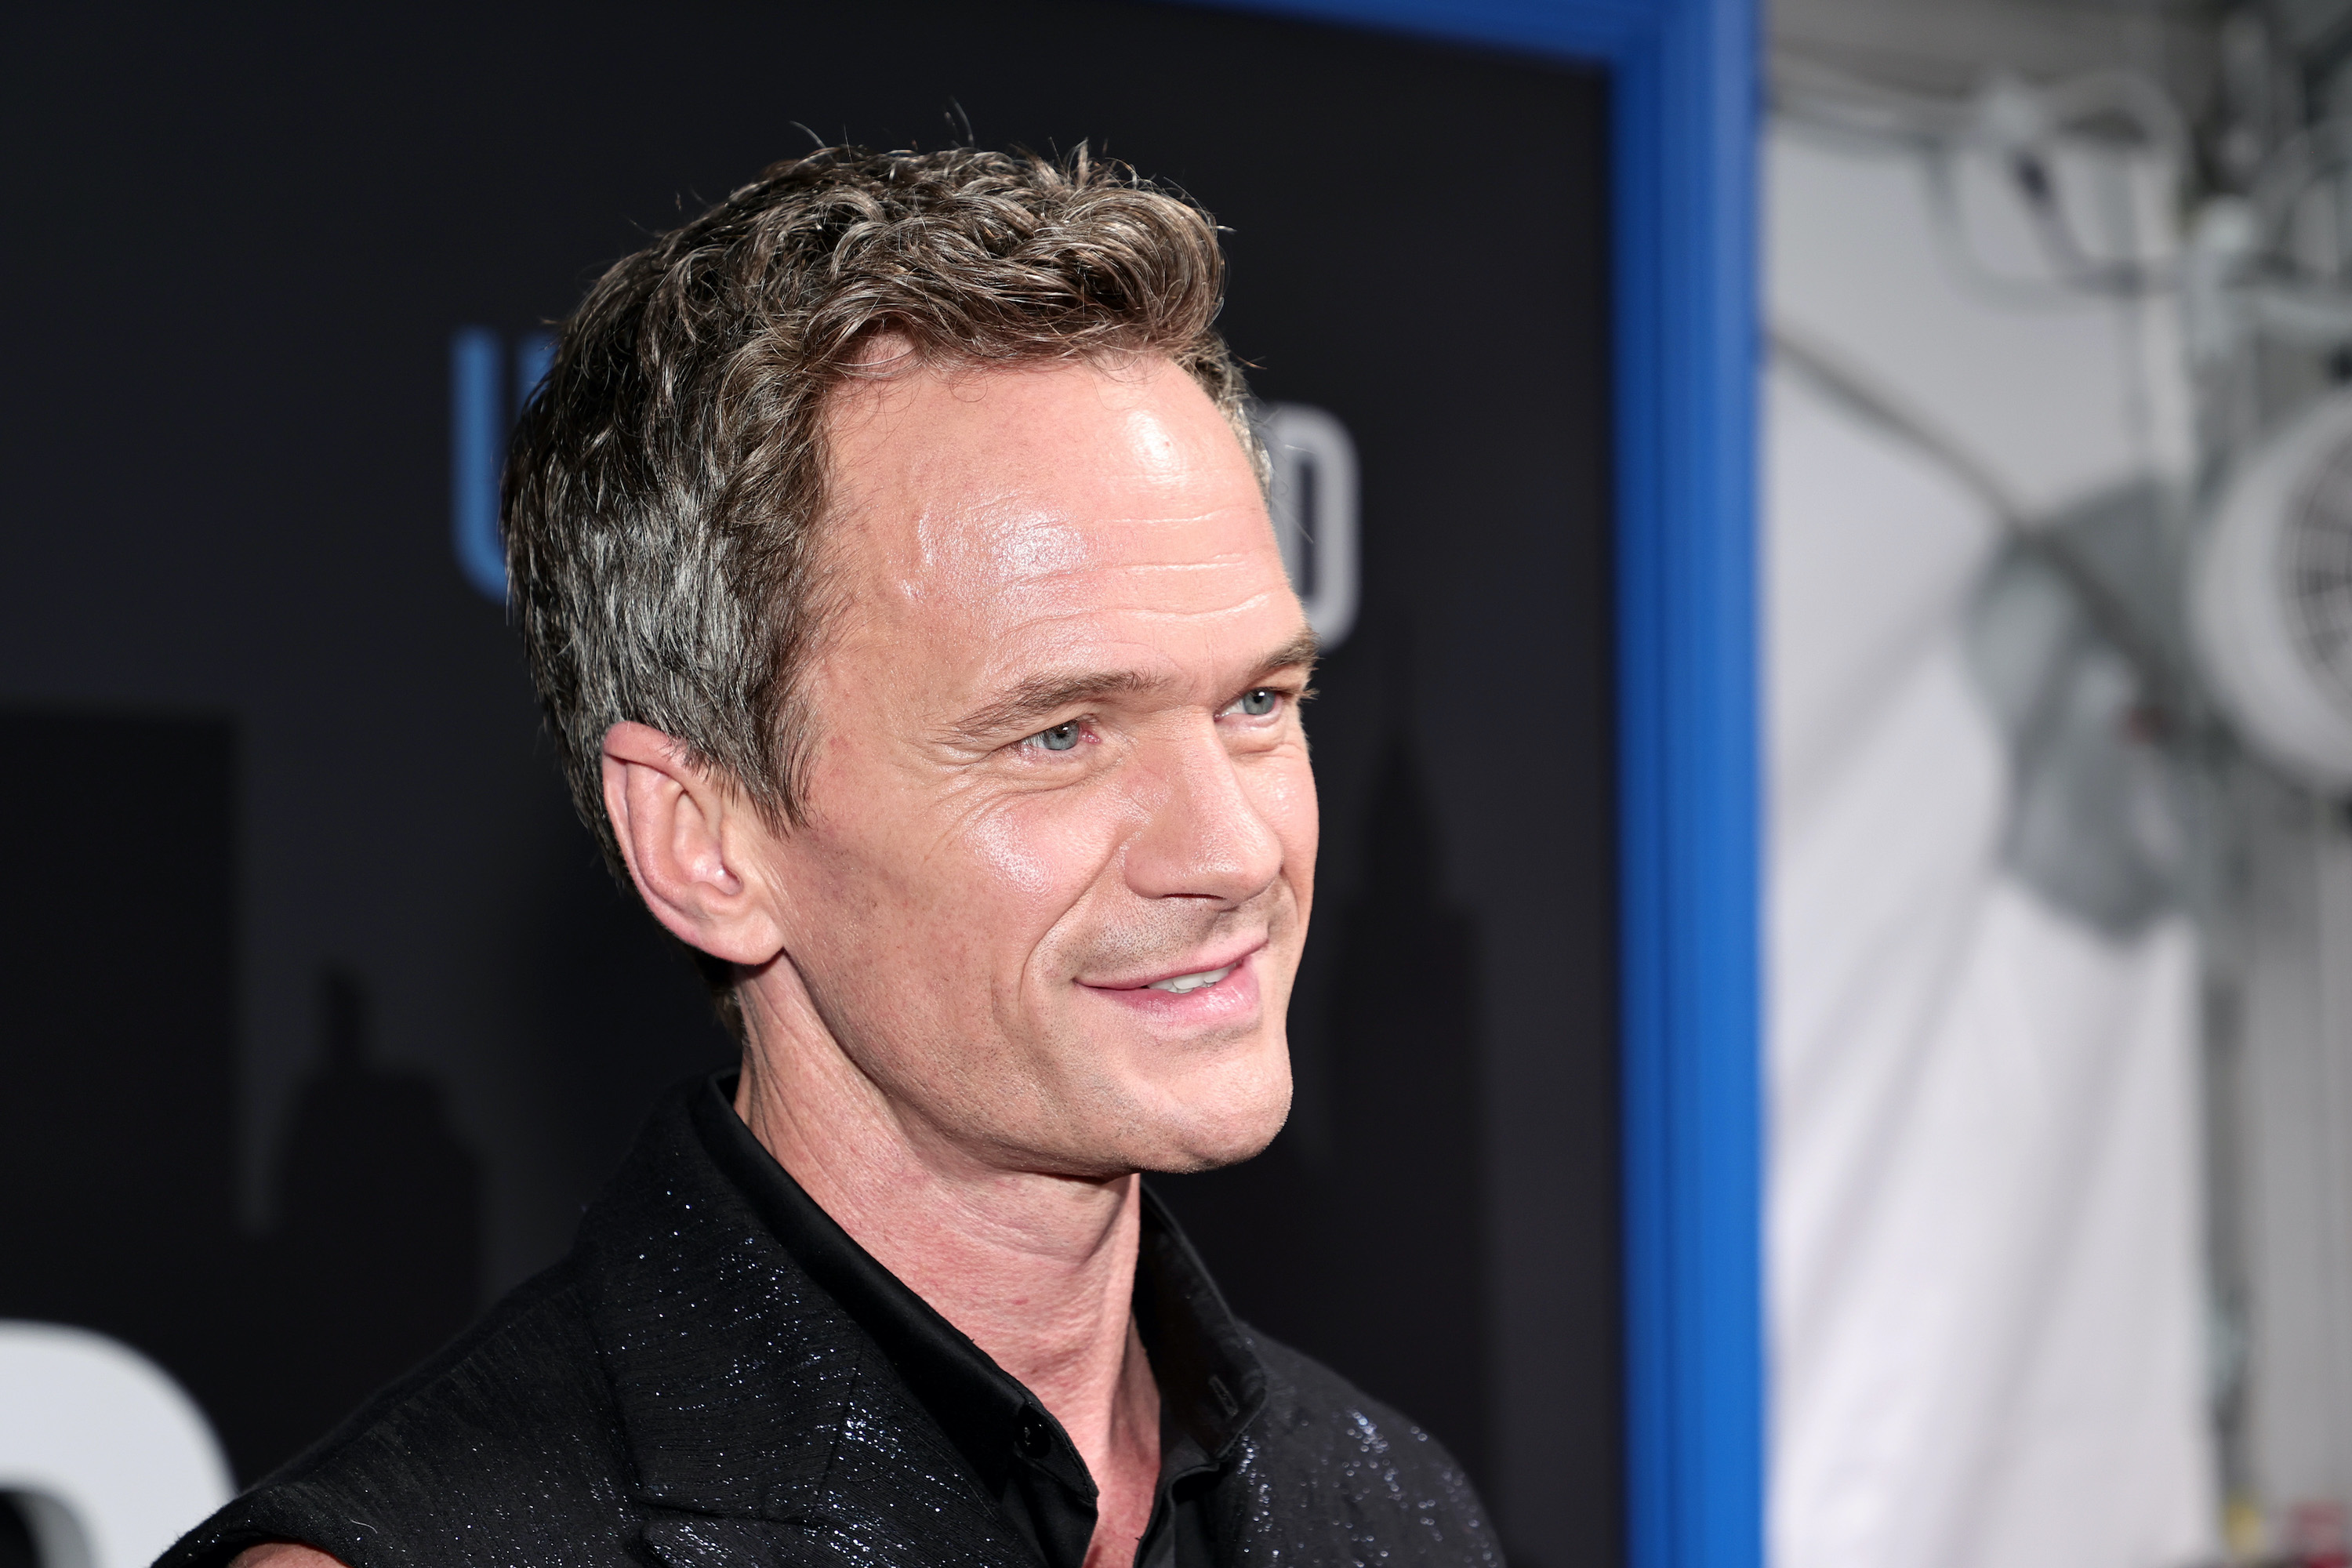 Doctor Who actor Neil Patrick Harris attends the premiere of Netflix's Uncoupled